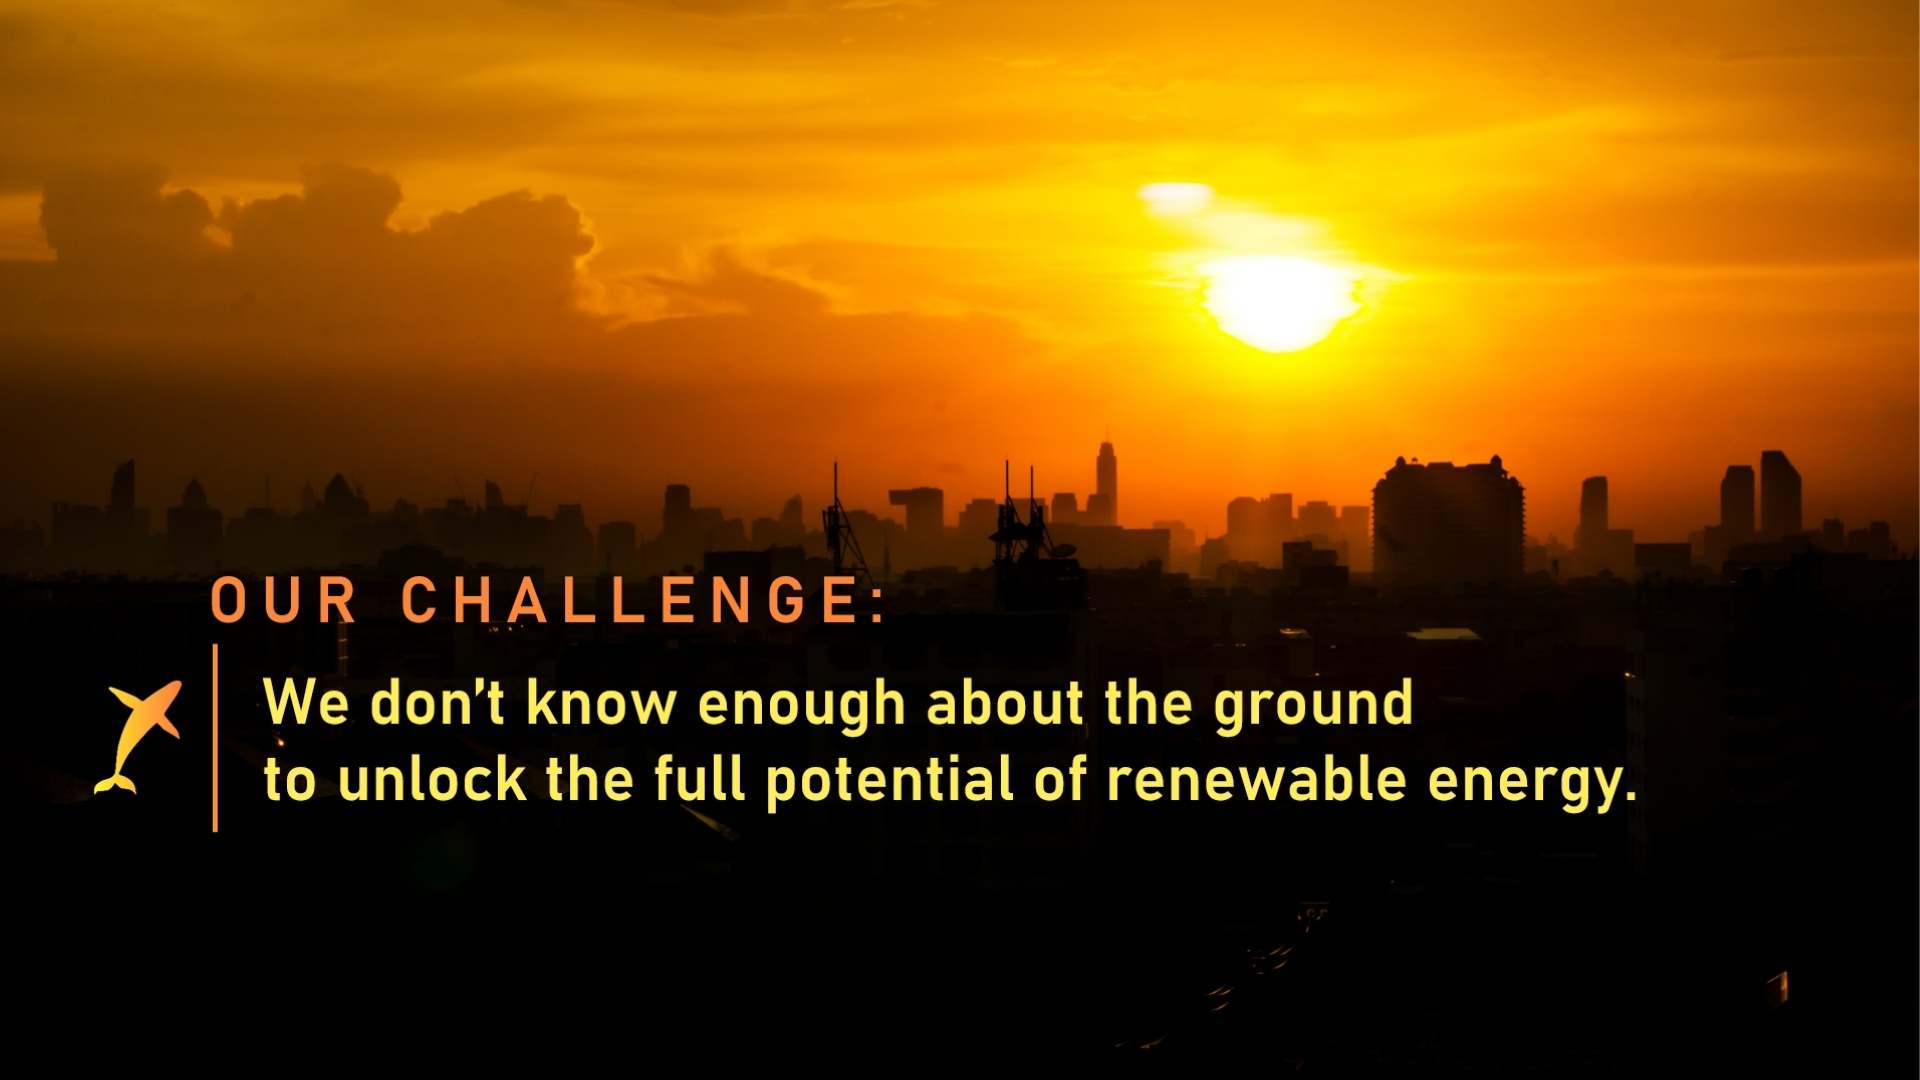 We don't know enough about the ground to unlock the full potential of renewable energy.